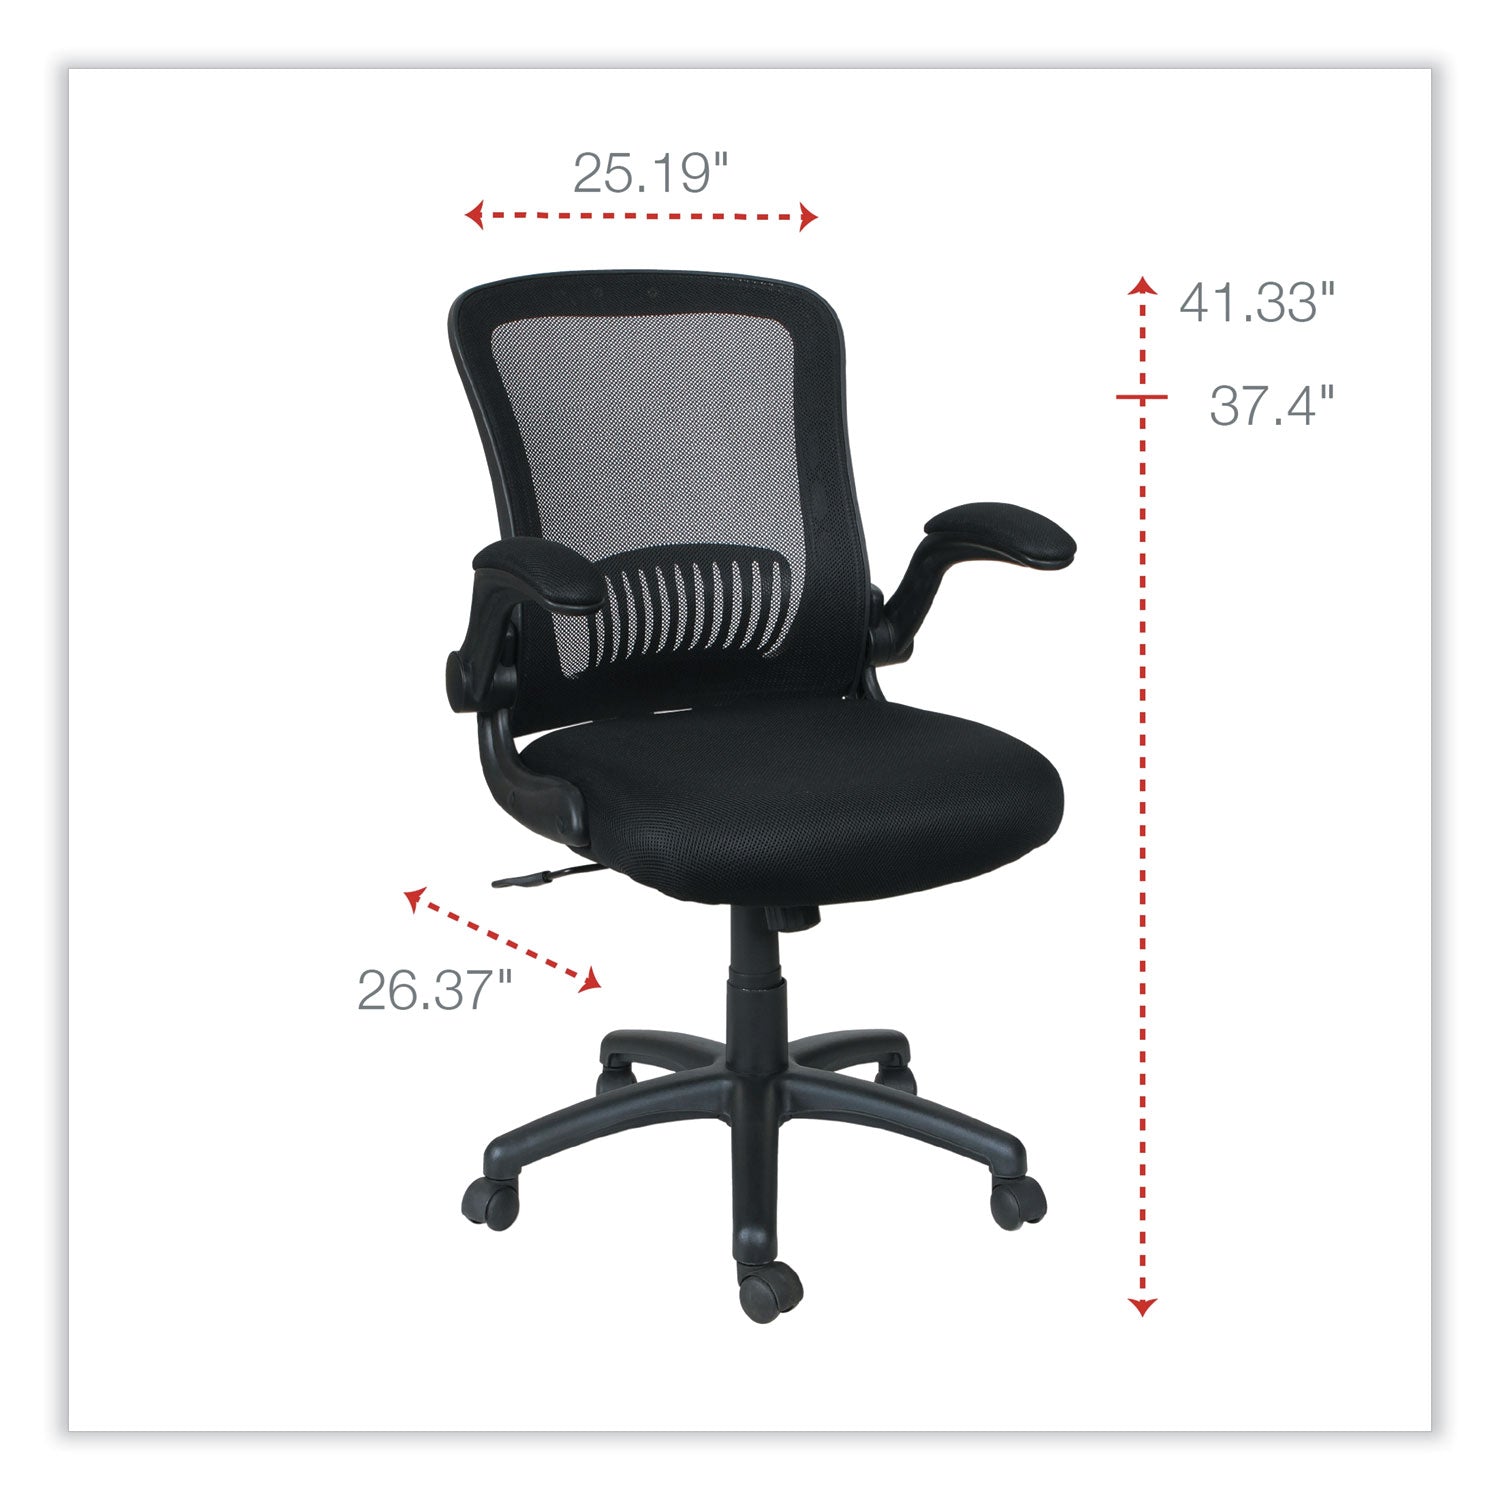 alera-eb-e-series-swivel-tilt-mid-back-mesh-chair-supports-up-to-275-lb-1811-to-2204-seat-height-black_aleebe4217 - 2